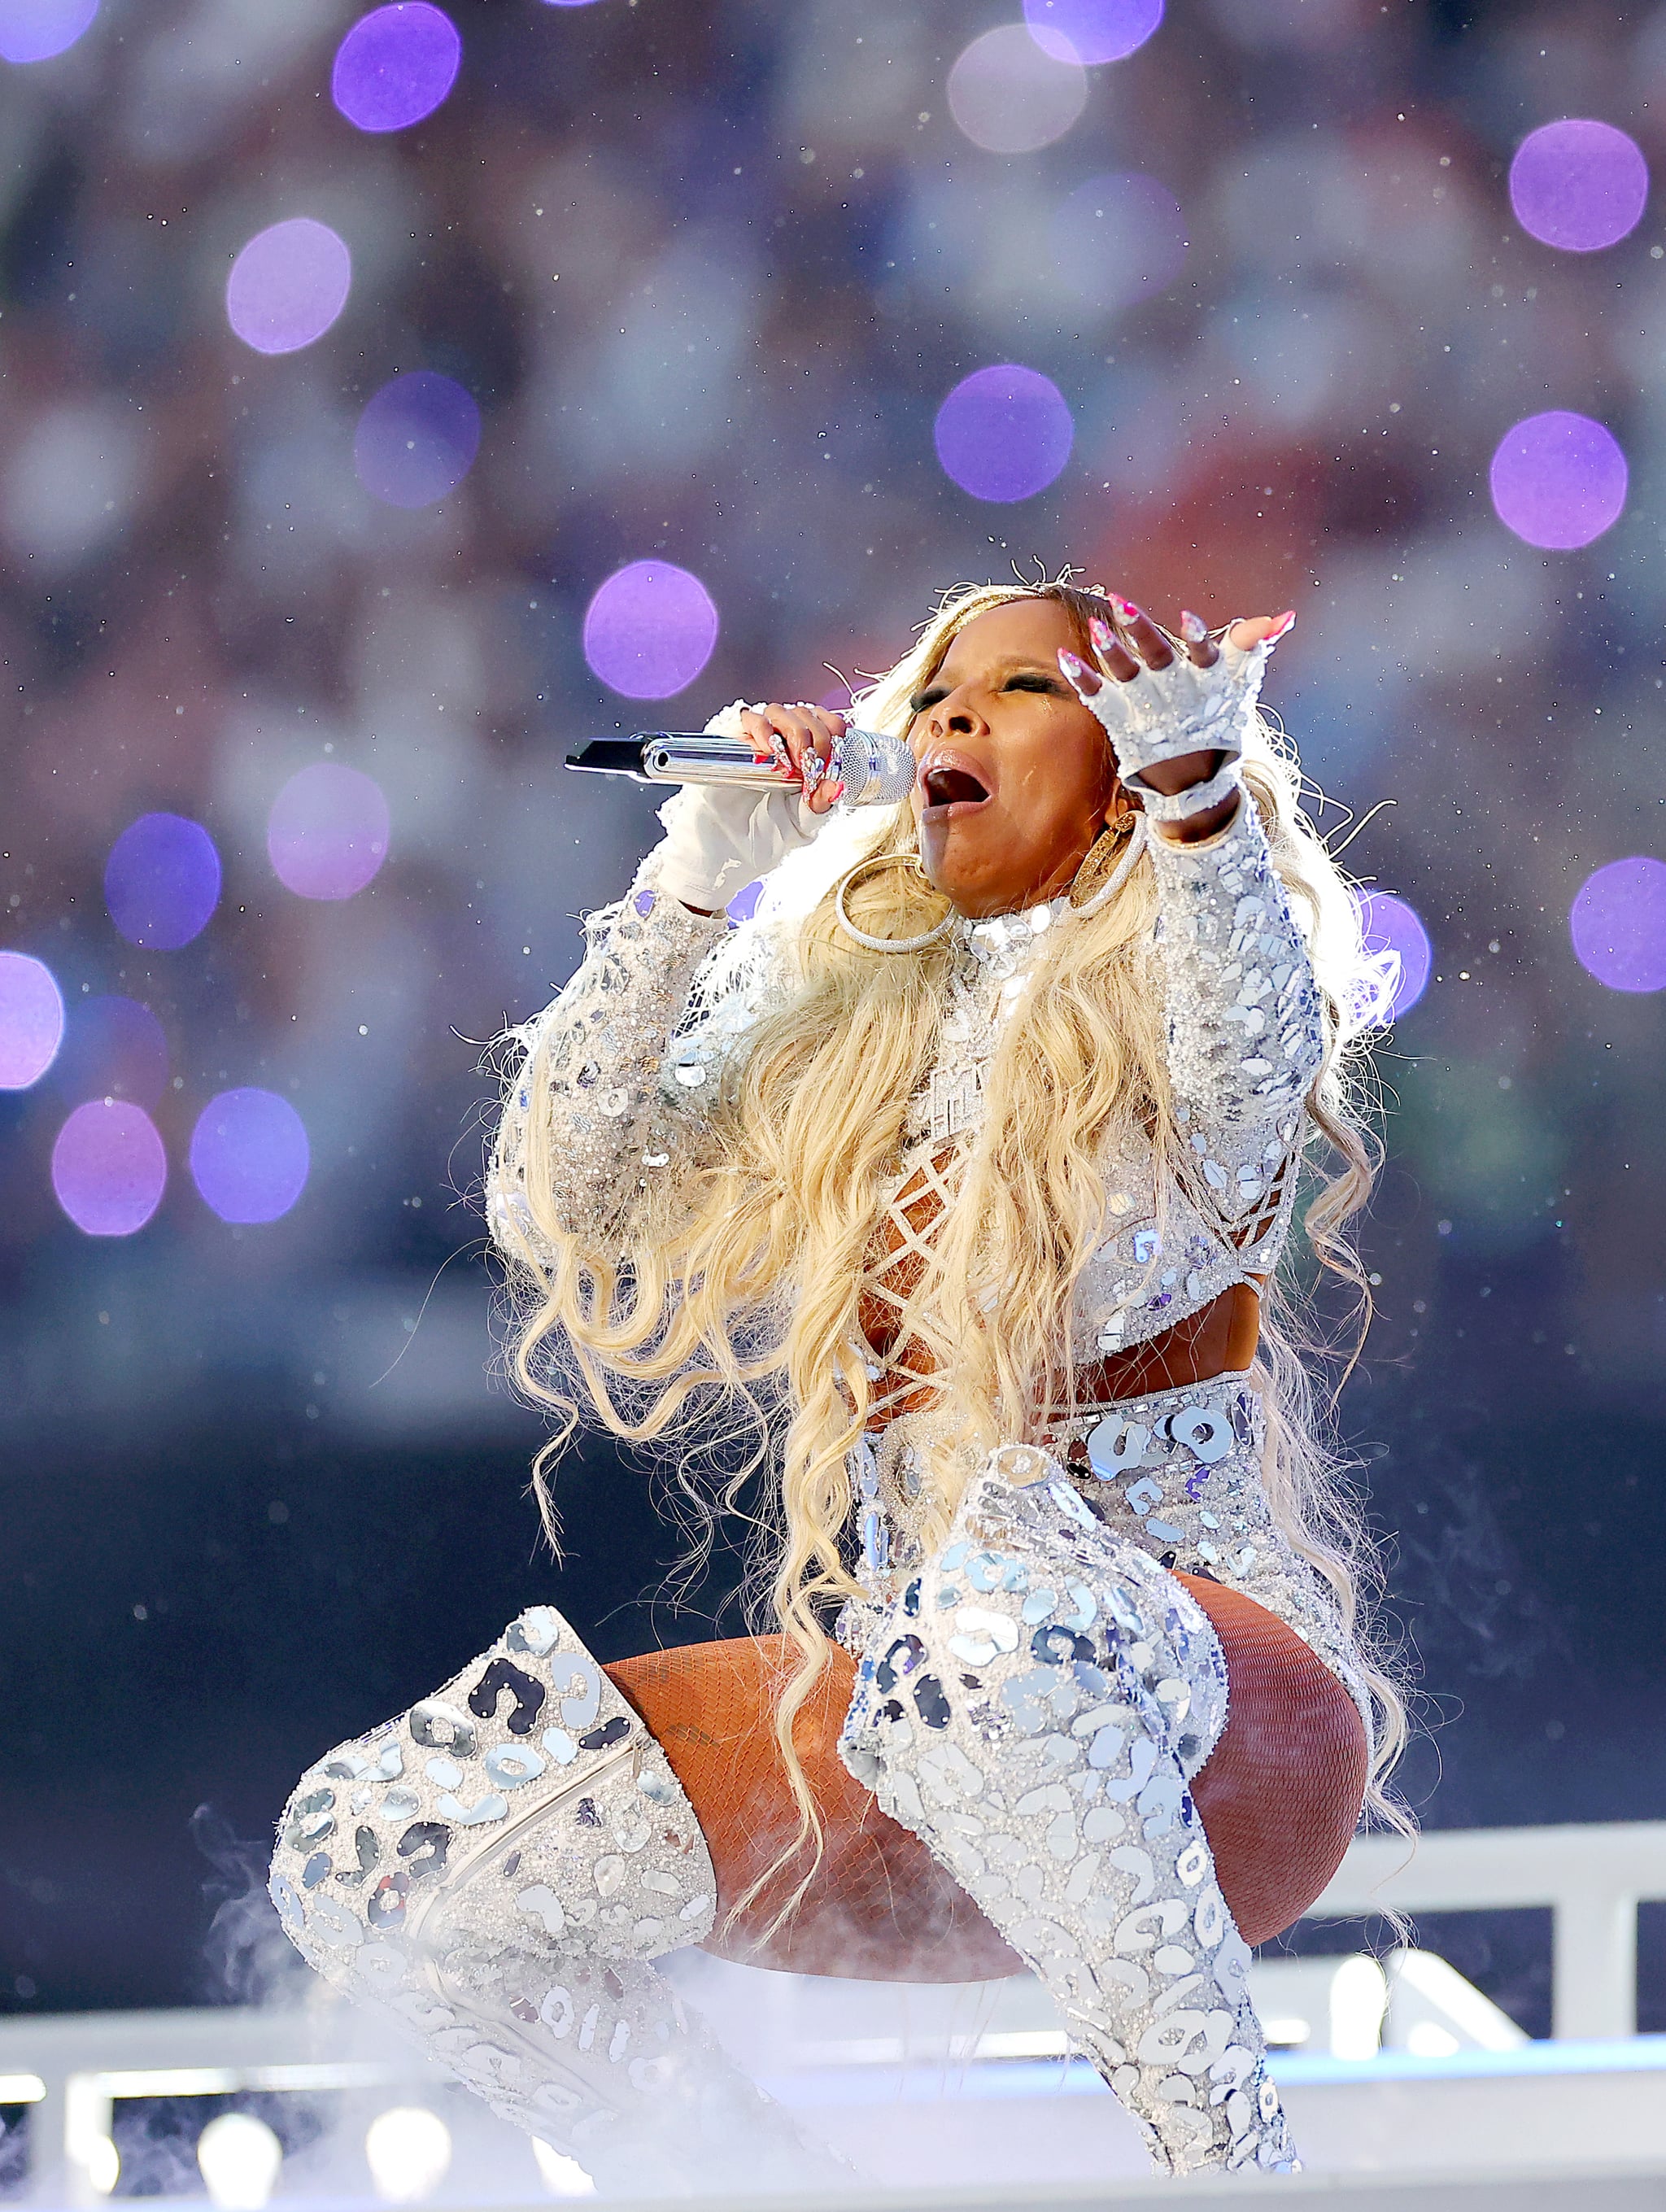 Mary J. Blige Won the 2022 Super Bowl Halftime Show